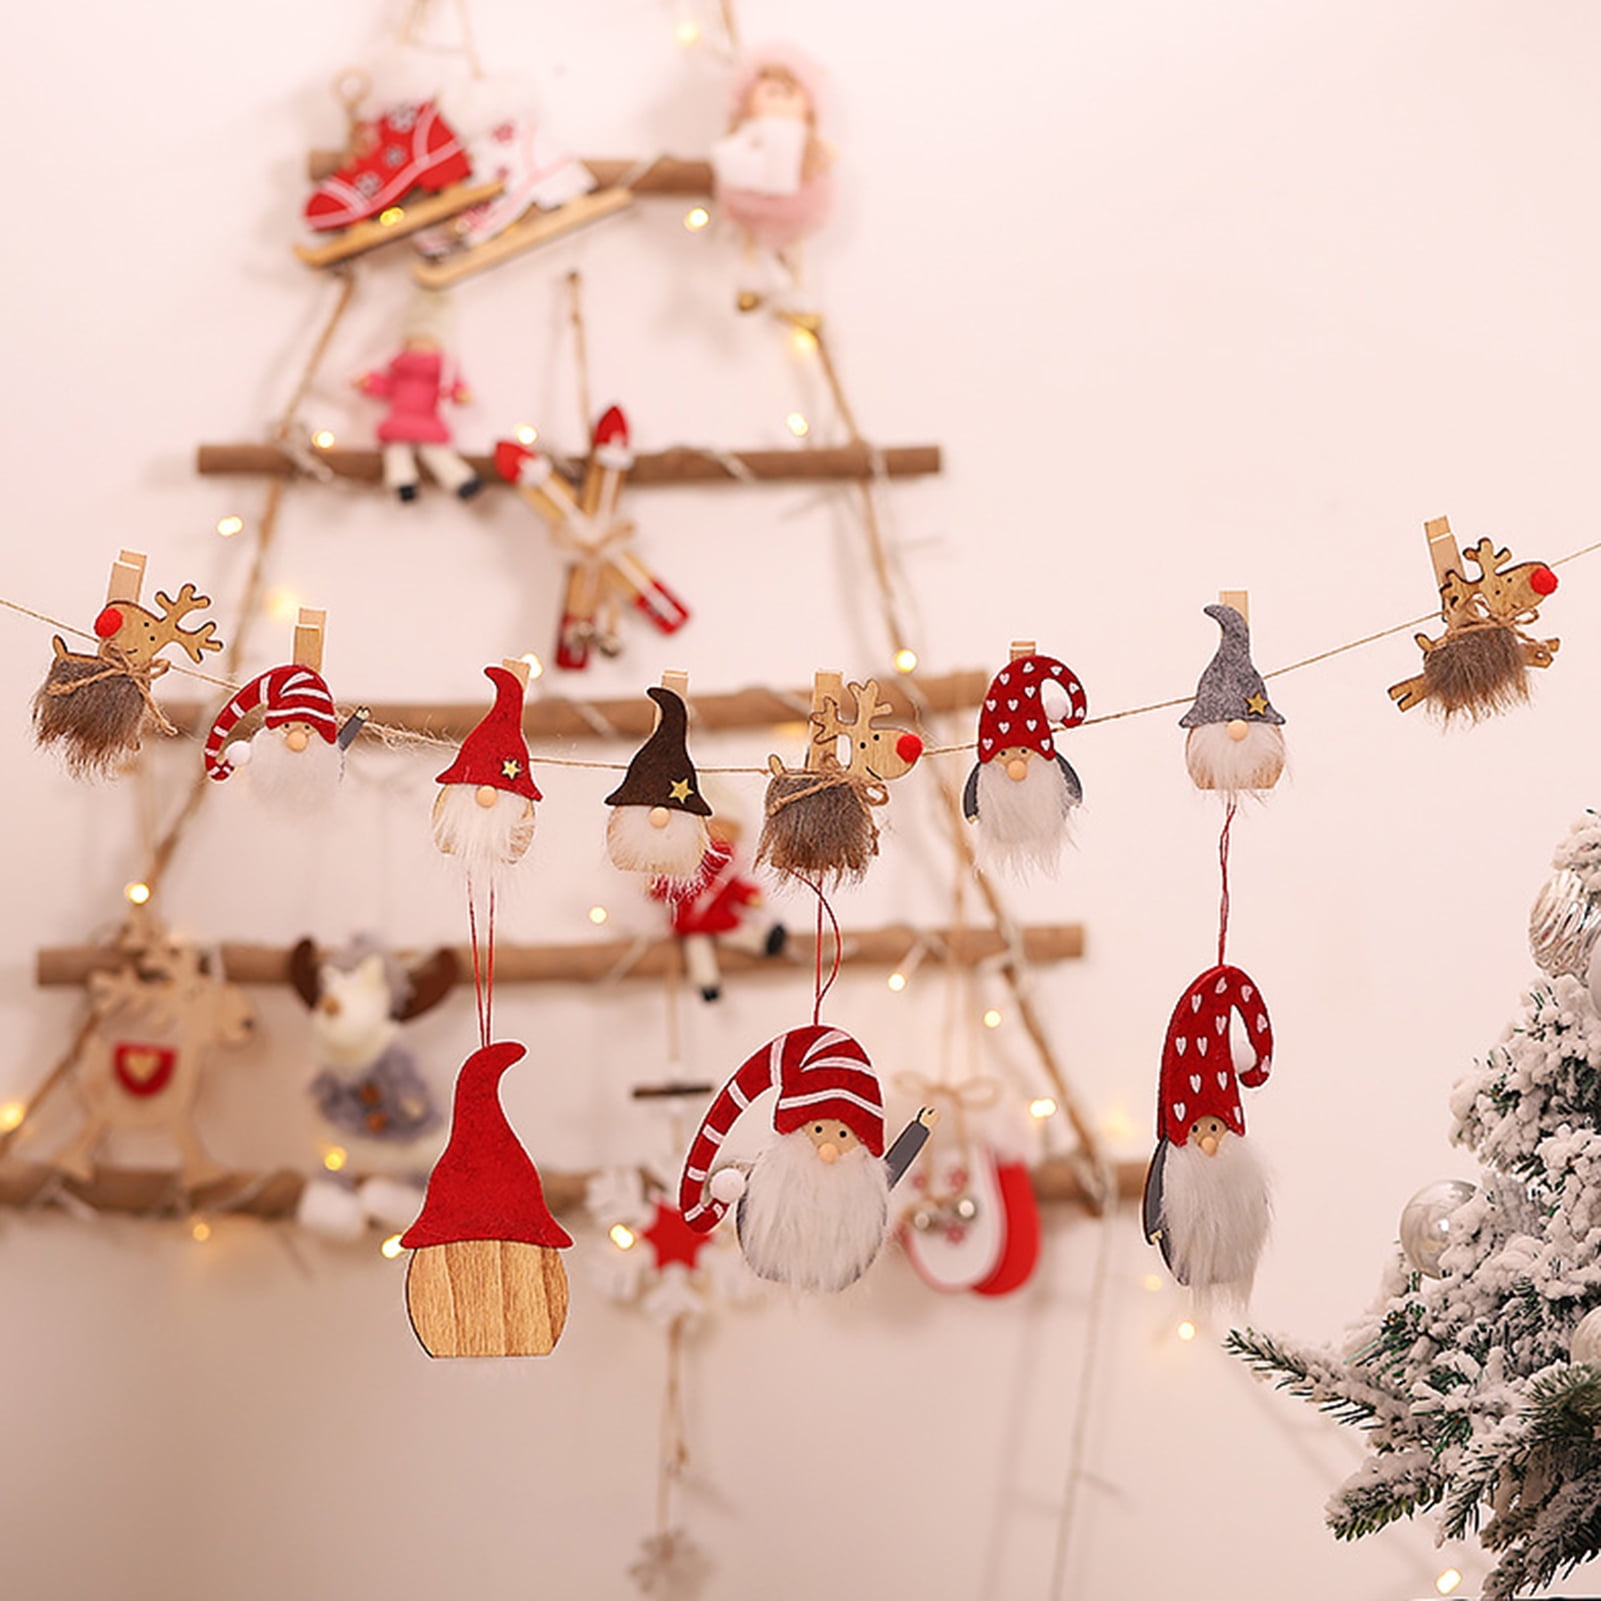 Wooden Santa Claus Clip，6 Pieces of Tree Decorations Hanger Clothespins Picture Display Crafts Christmas Decoration Party Office Decoration DIY Photo Paper Holder Merry 